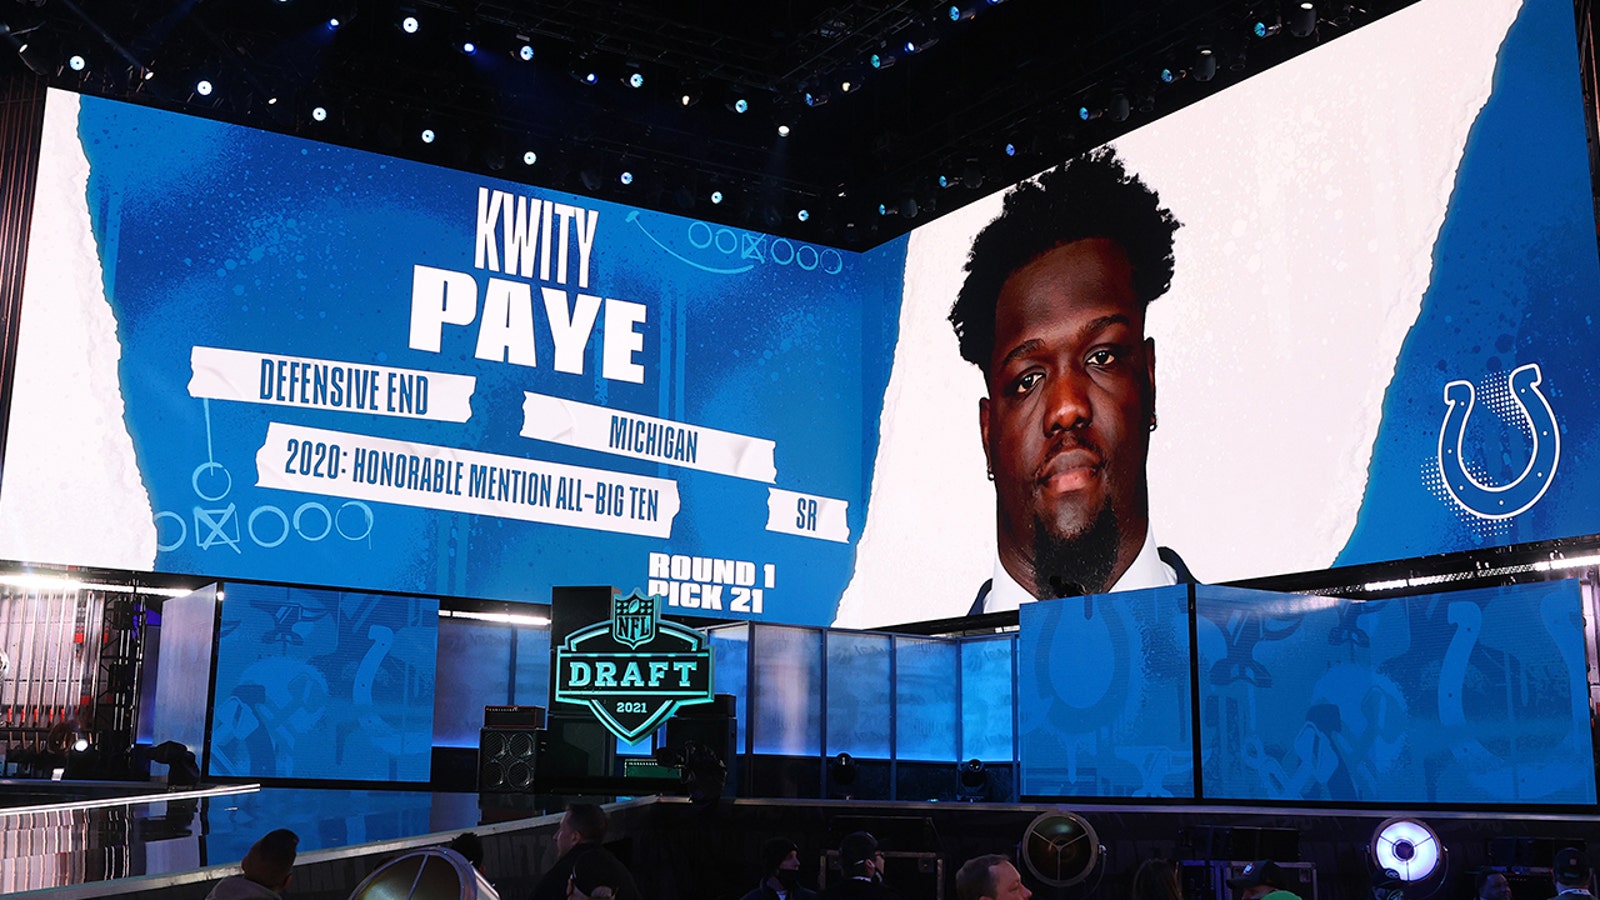 The Indianapolis Colts selected standout edge rusher Kwity Paye with the 21st pick in the draft.